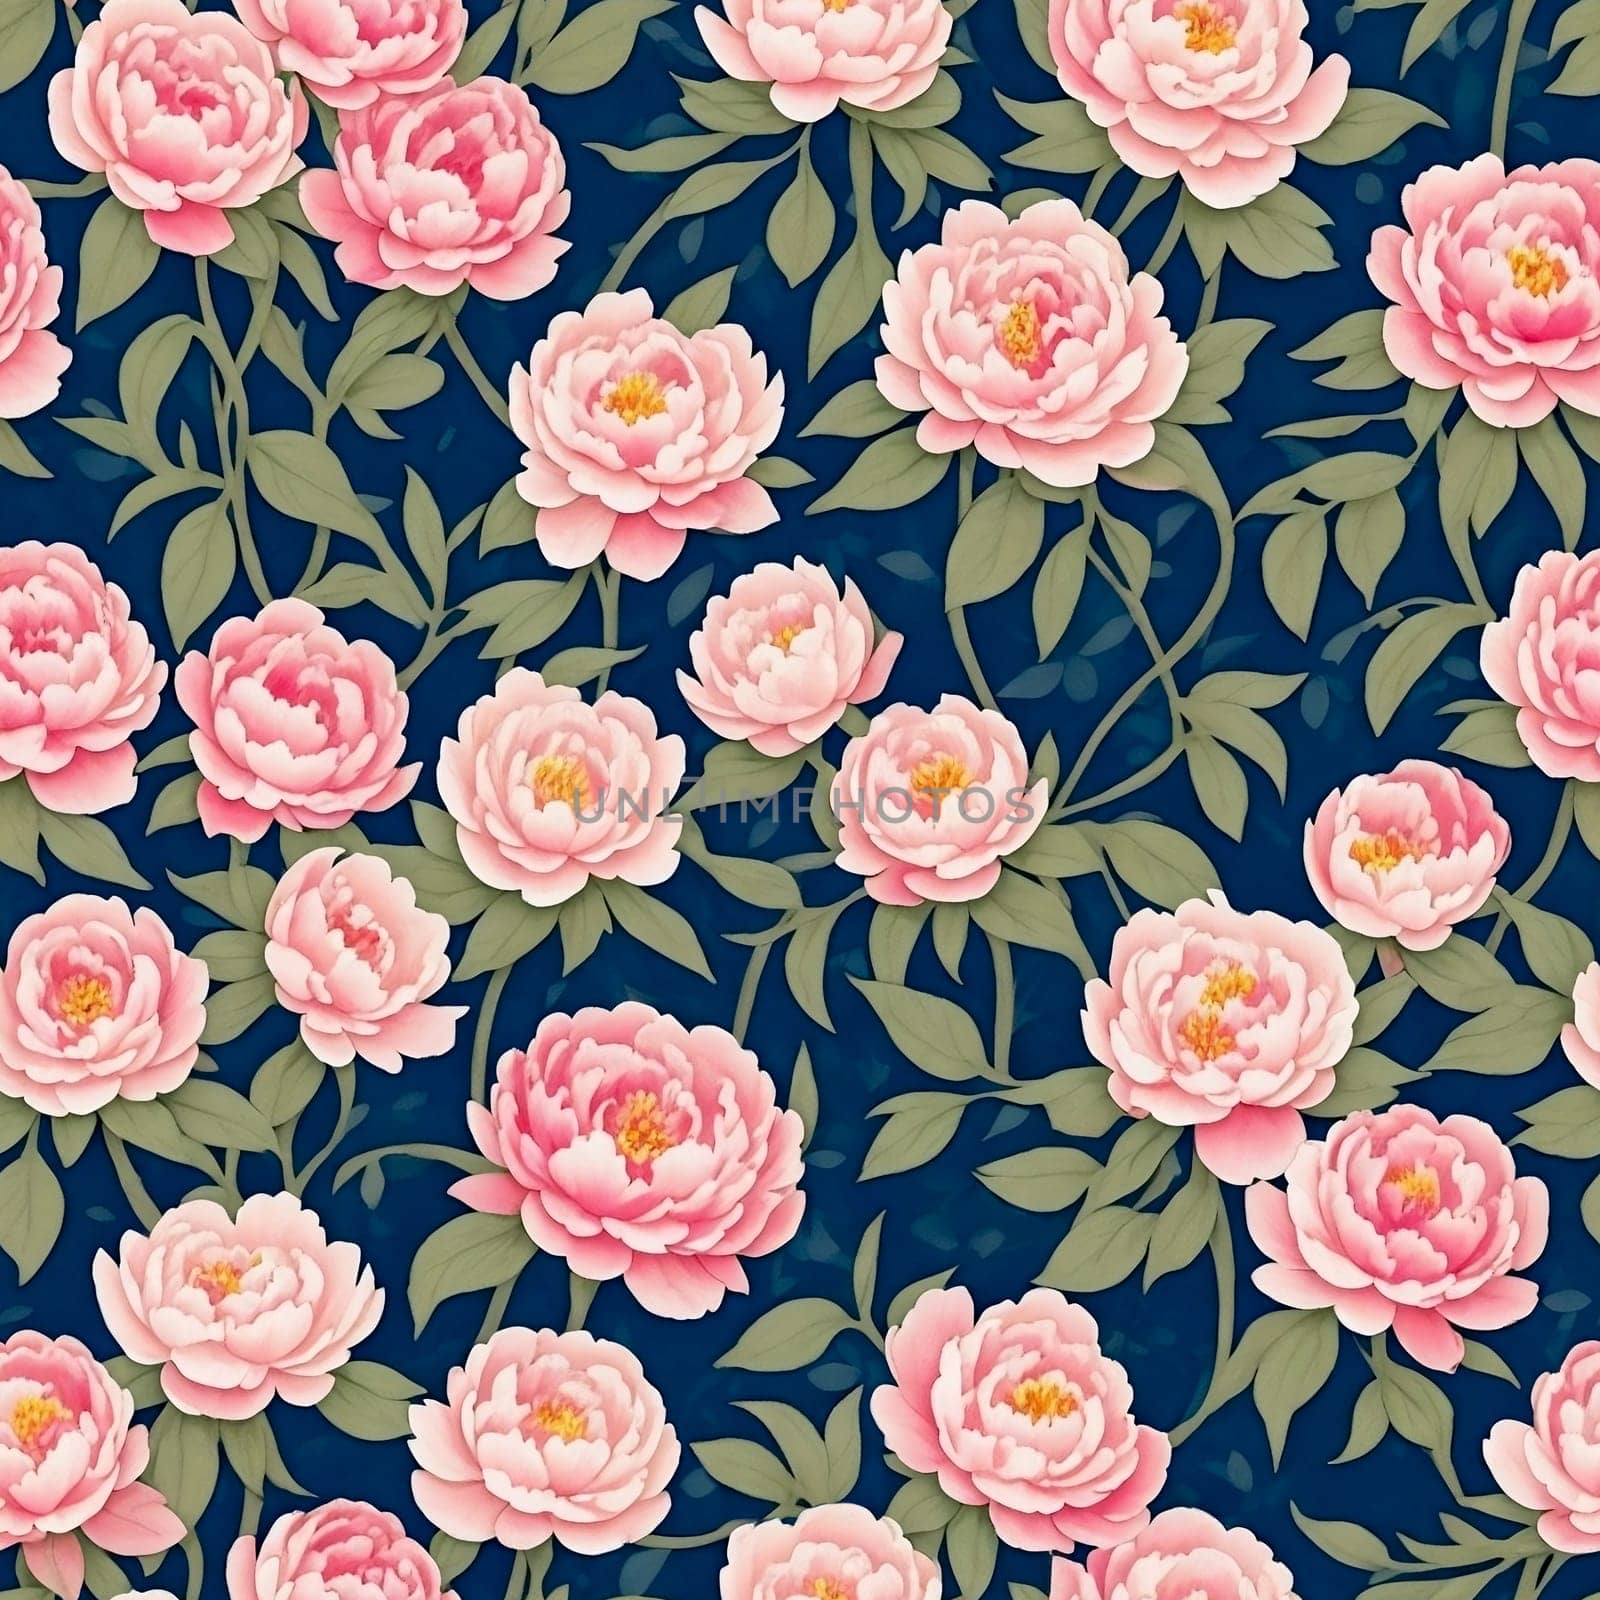 Floral Seamless Pattern with Light Pink Peonies with HkackGreen Leaves on Dark Blue. Wallpaper Design for Textiles, Interior, Clothes, Wedding Invitations, Postcards, Greetings. AI Generated